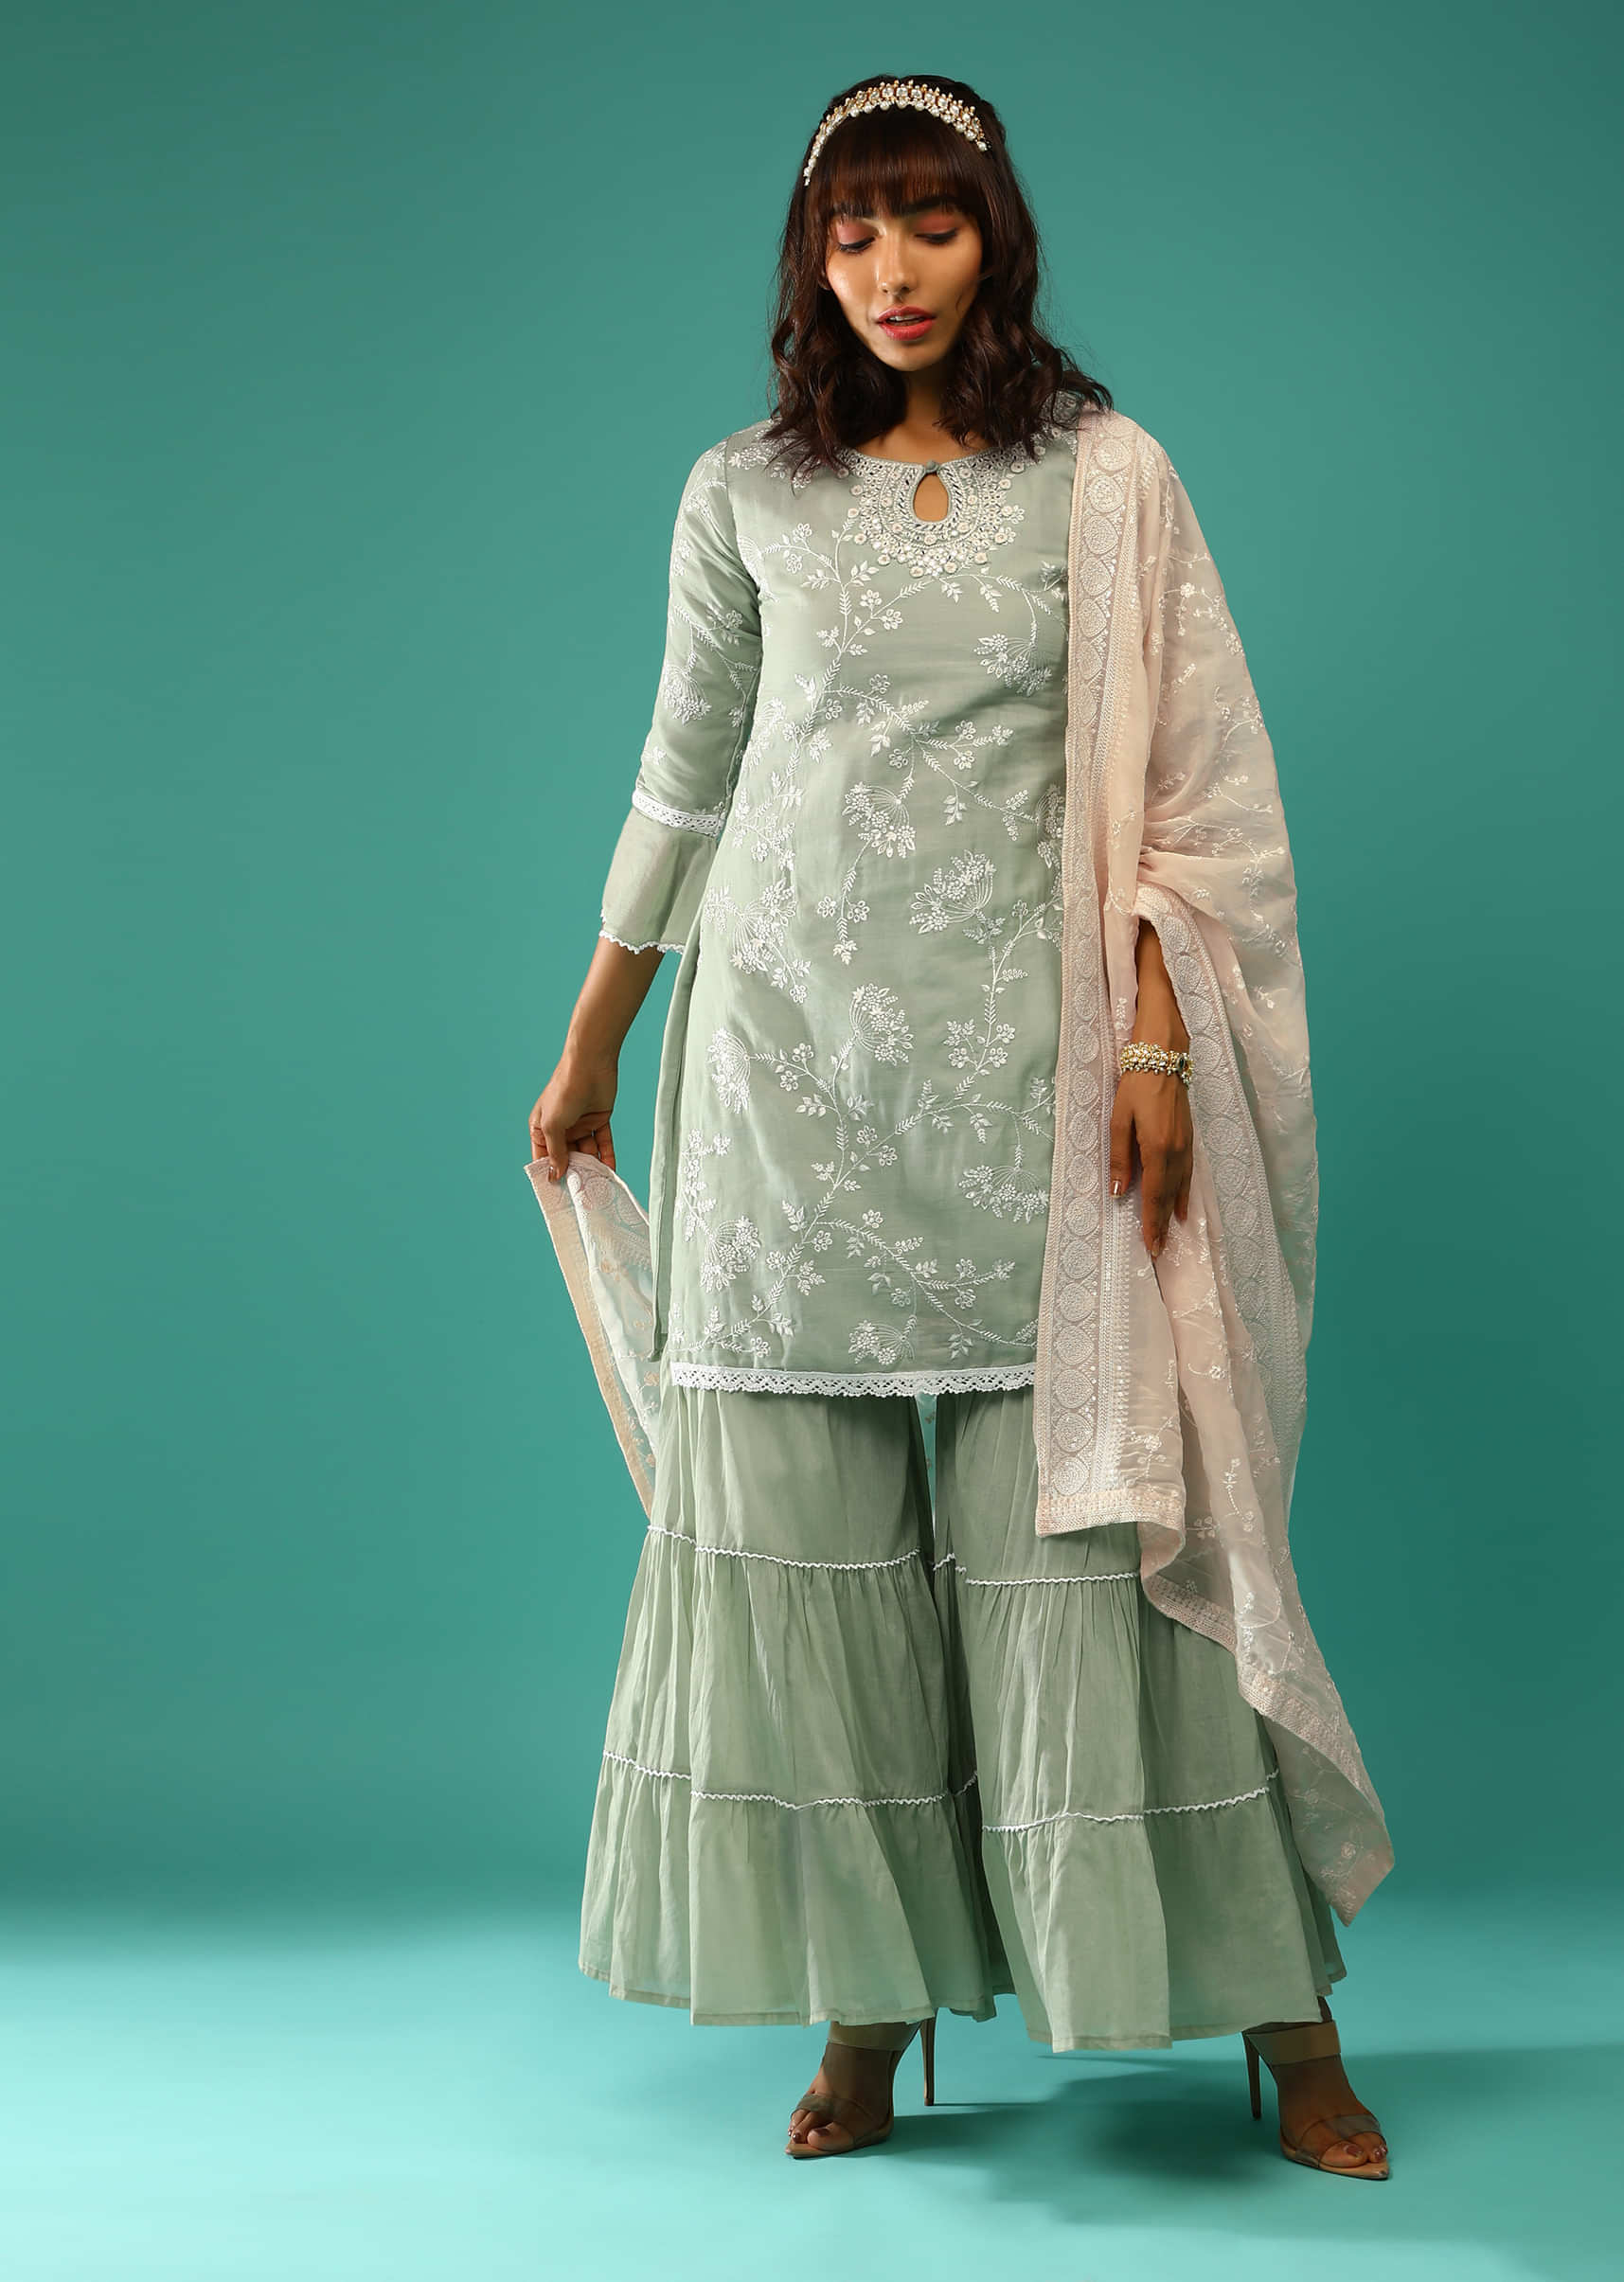 Dusty Green Sharara Suit In Cotton With Resham Embroidered Floral Jaal And Ruffle Sleeve Detailing  